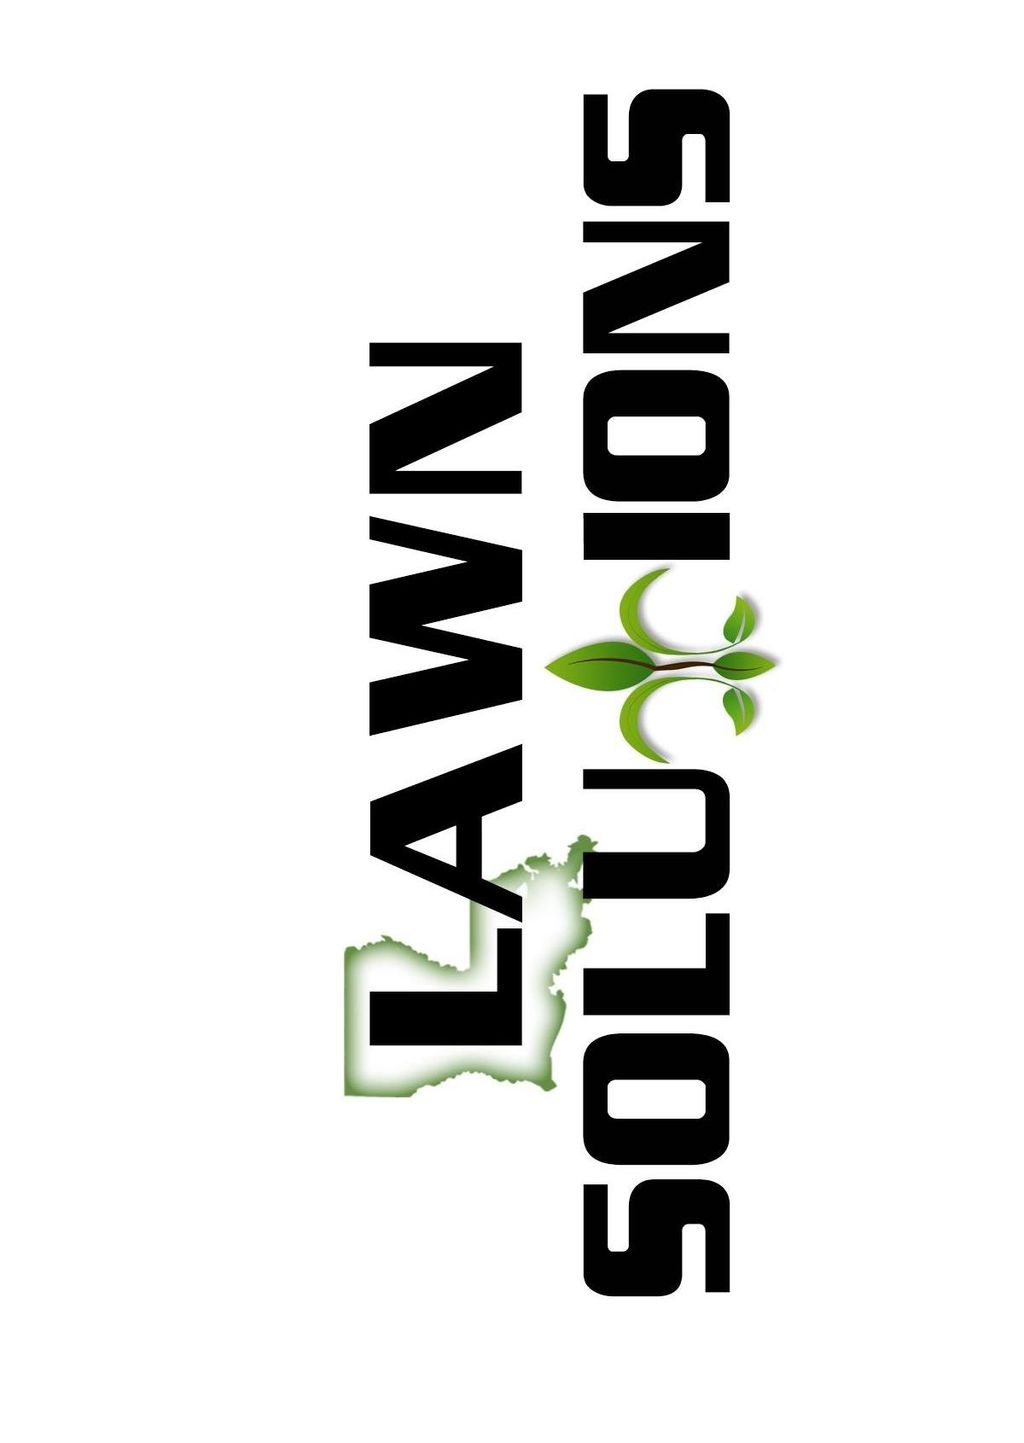 Lawn solutions